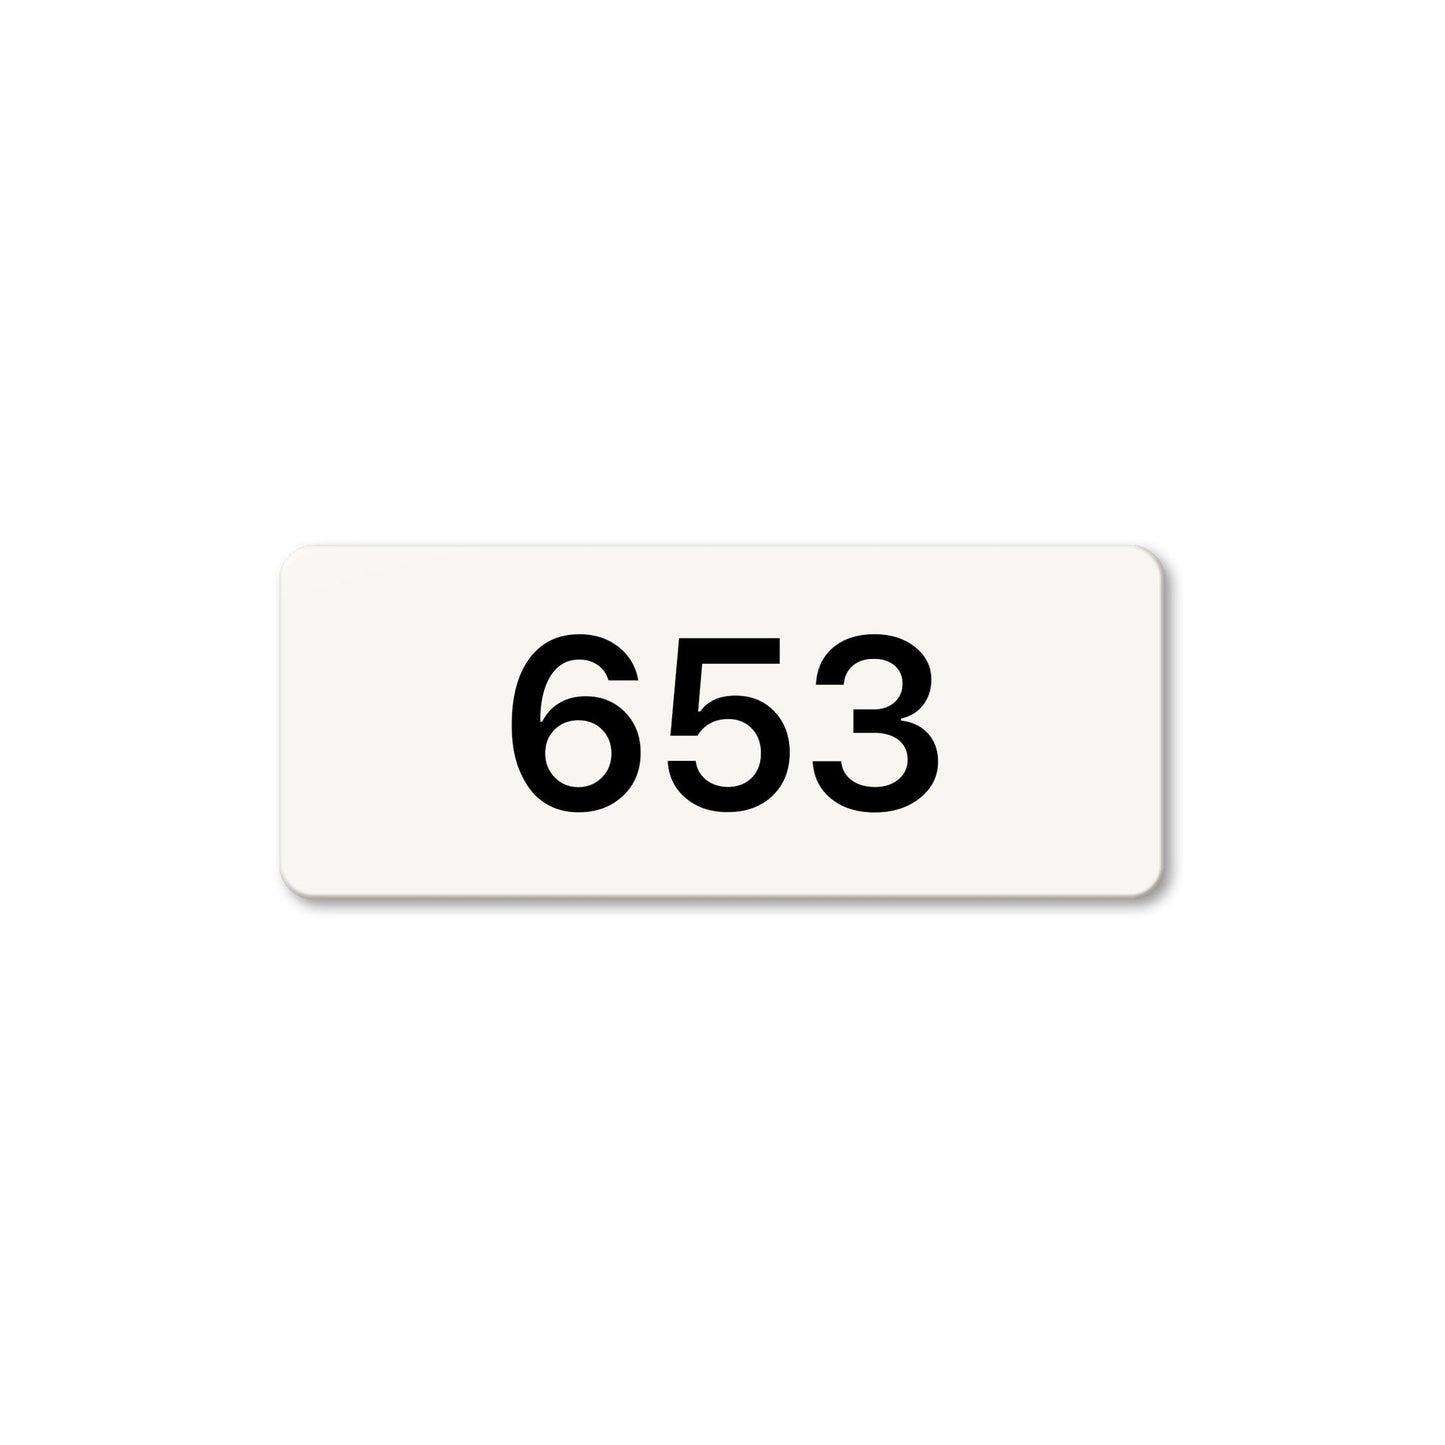 Numeral 653